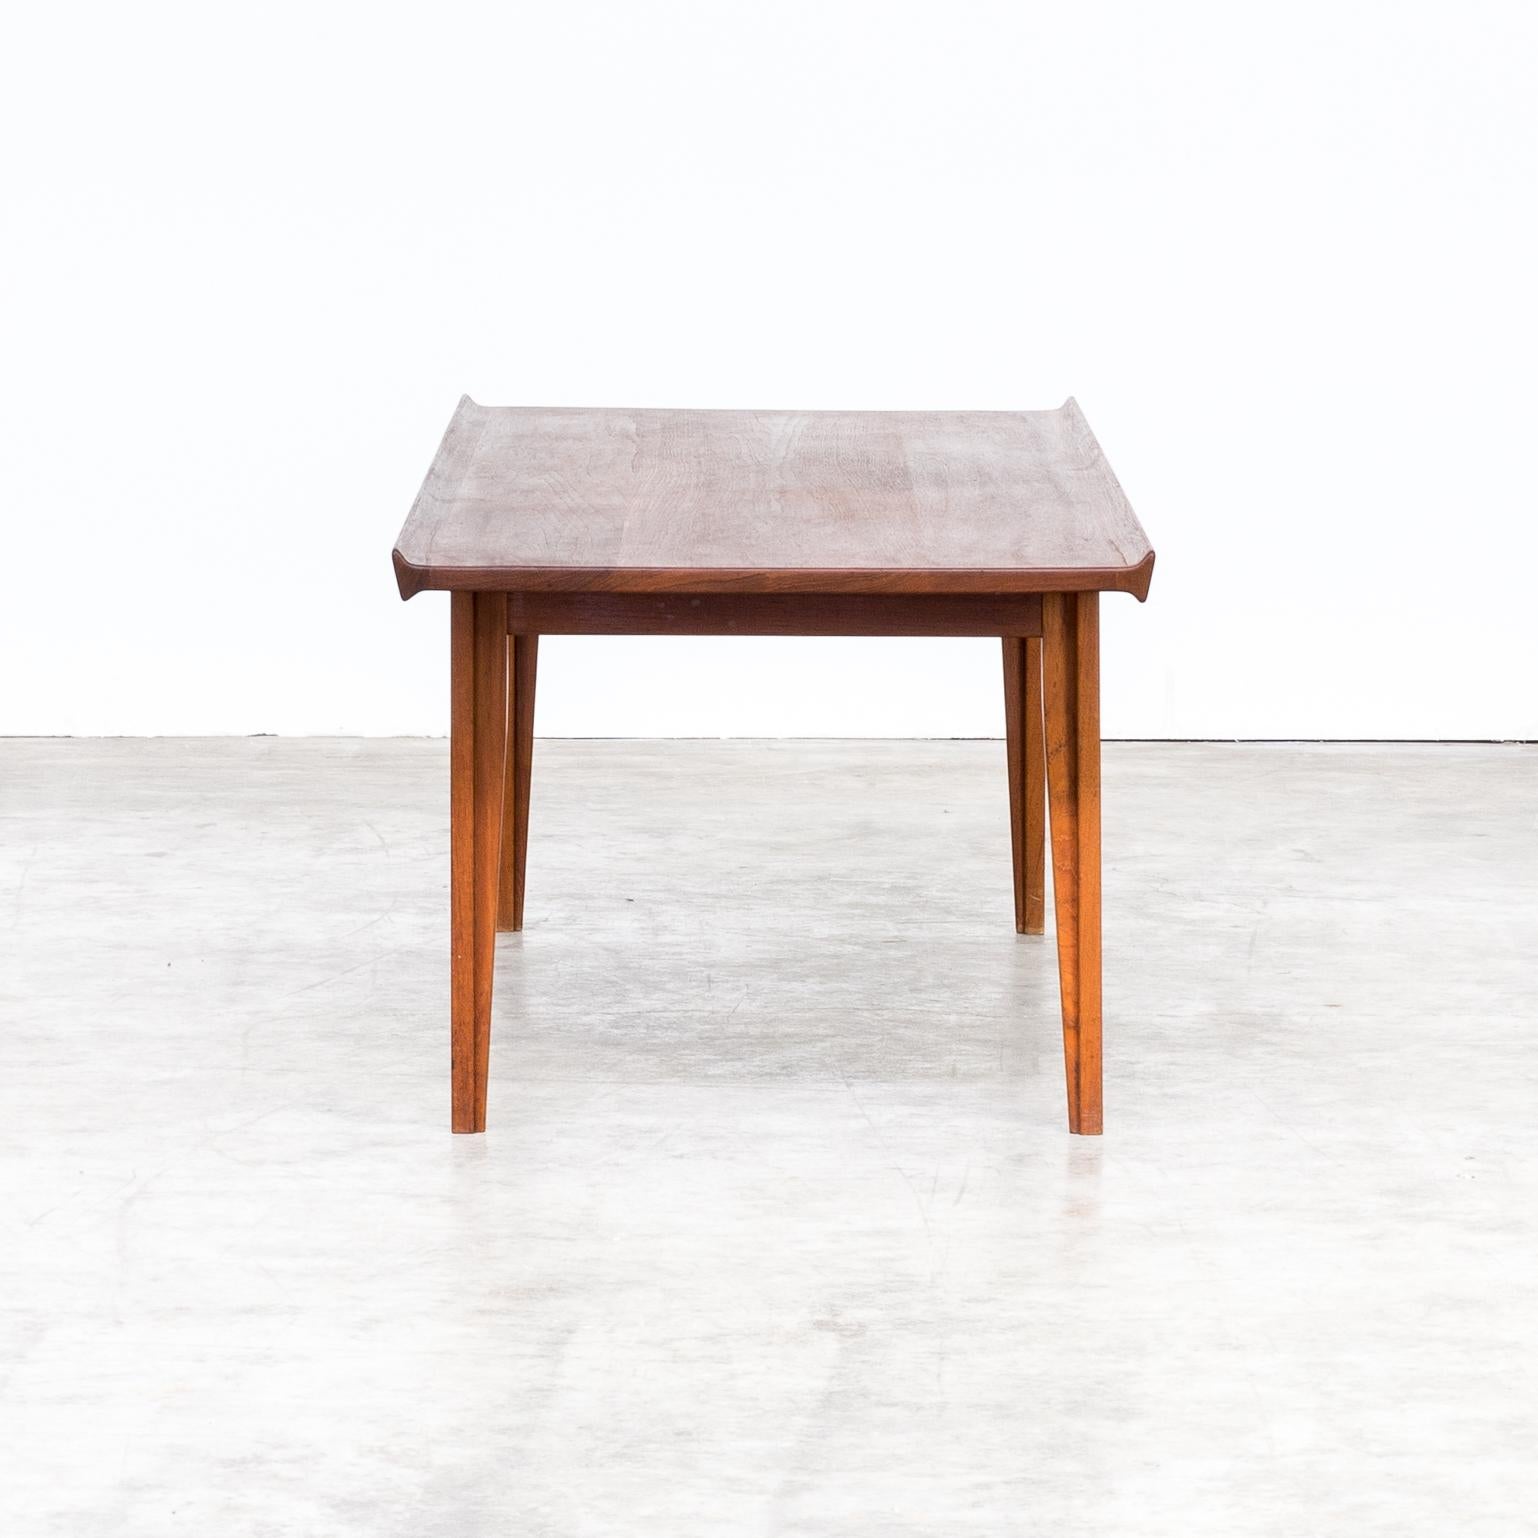 1950s Finn Juhl FD532 teak coffee table for France & Son. Beautiful Finn Juhl coffee table, understated but complicated in the detail. The solid teak top is wonderfully sculptured along the long sides whilst the legs are made of two individual